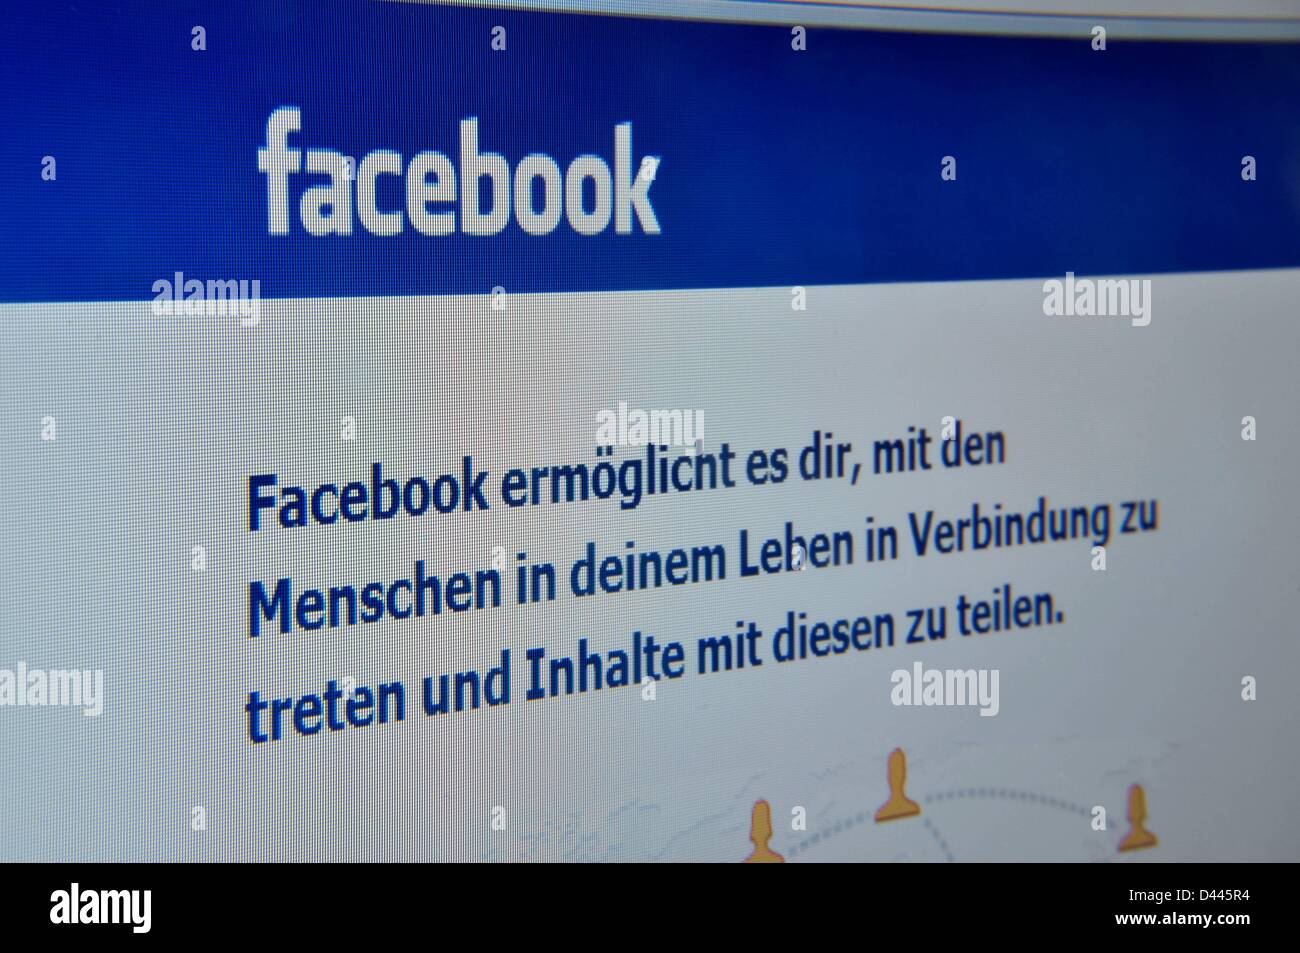 Illustration - View of the Internet page of the social networking service 'facebook' on 9 July 2911. In the text that is written beneath the logo, the German translation of the motto of the company is presented: 'Facebook helps you connect and share with the people in your life.' Fotoarchiv für ZeitgeschichteS.Steinach Stock Photo